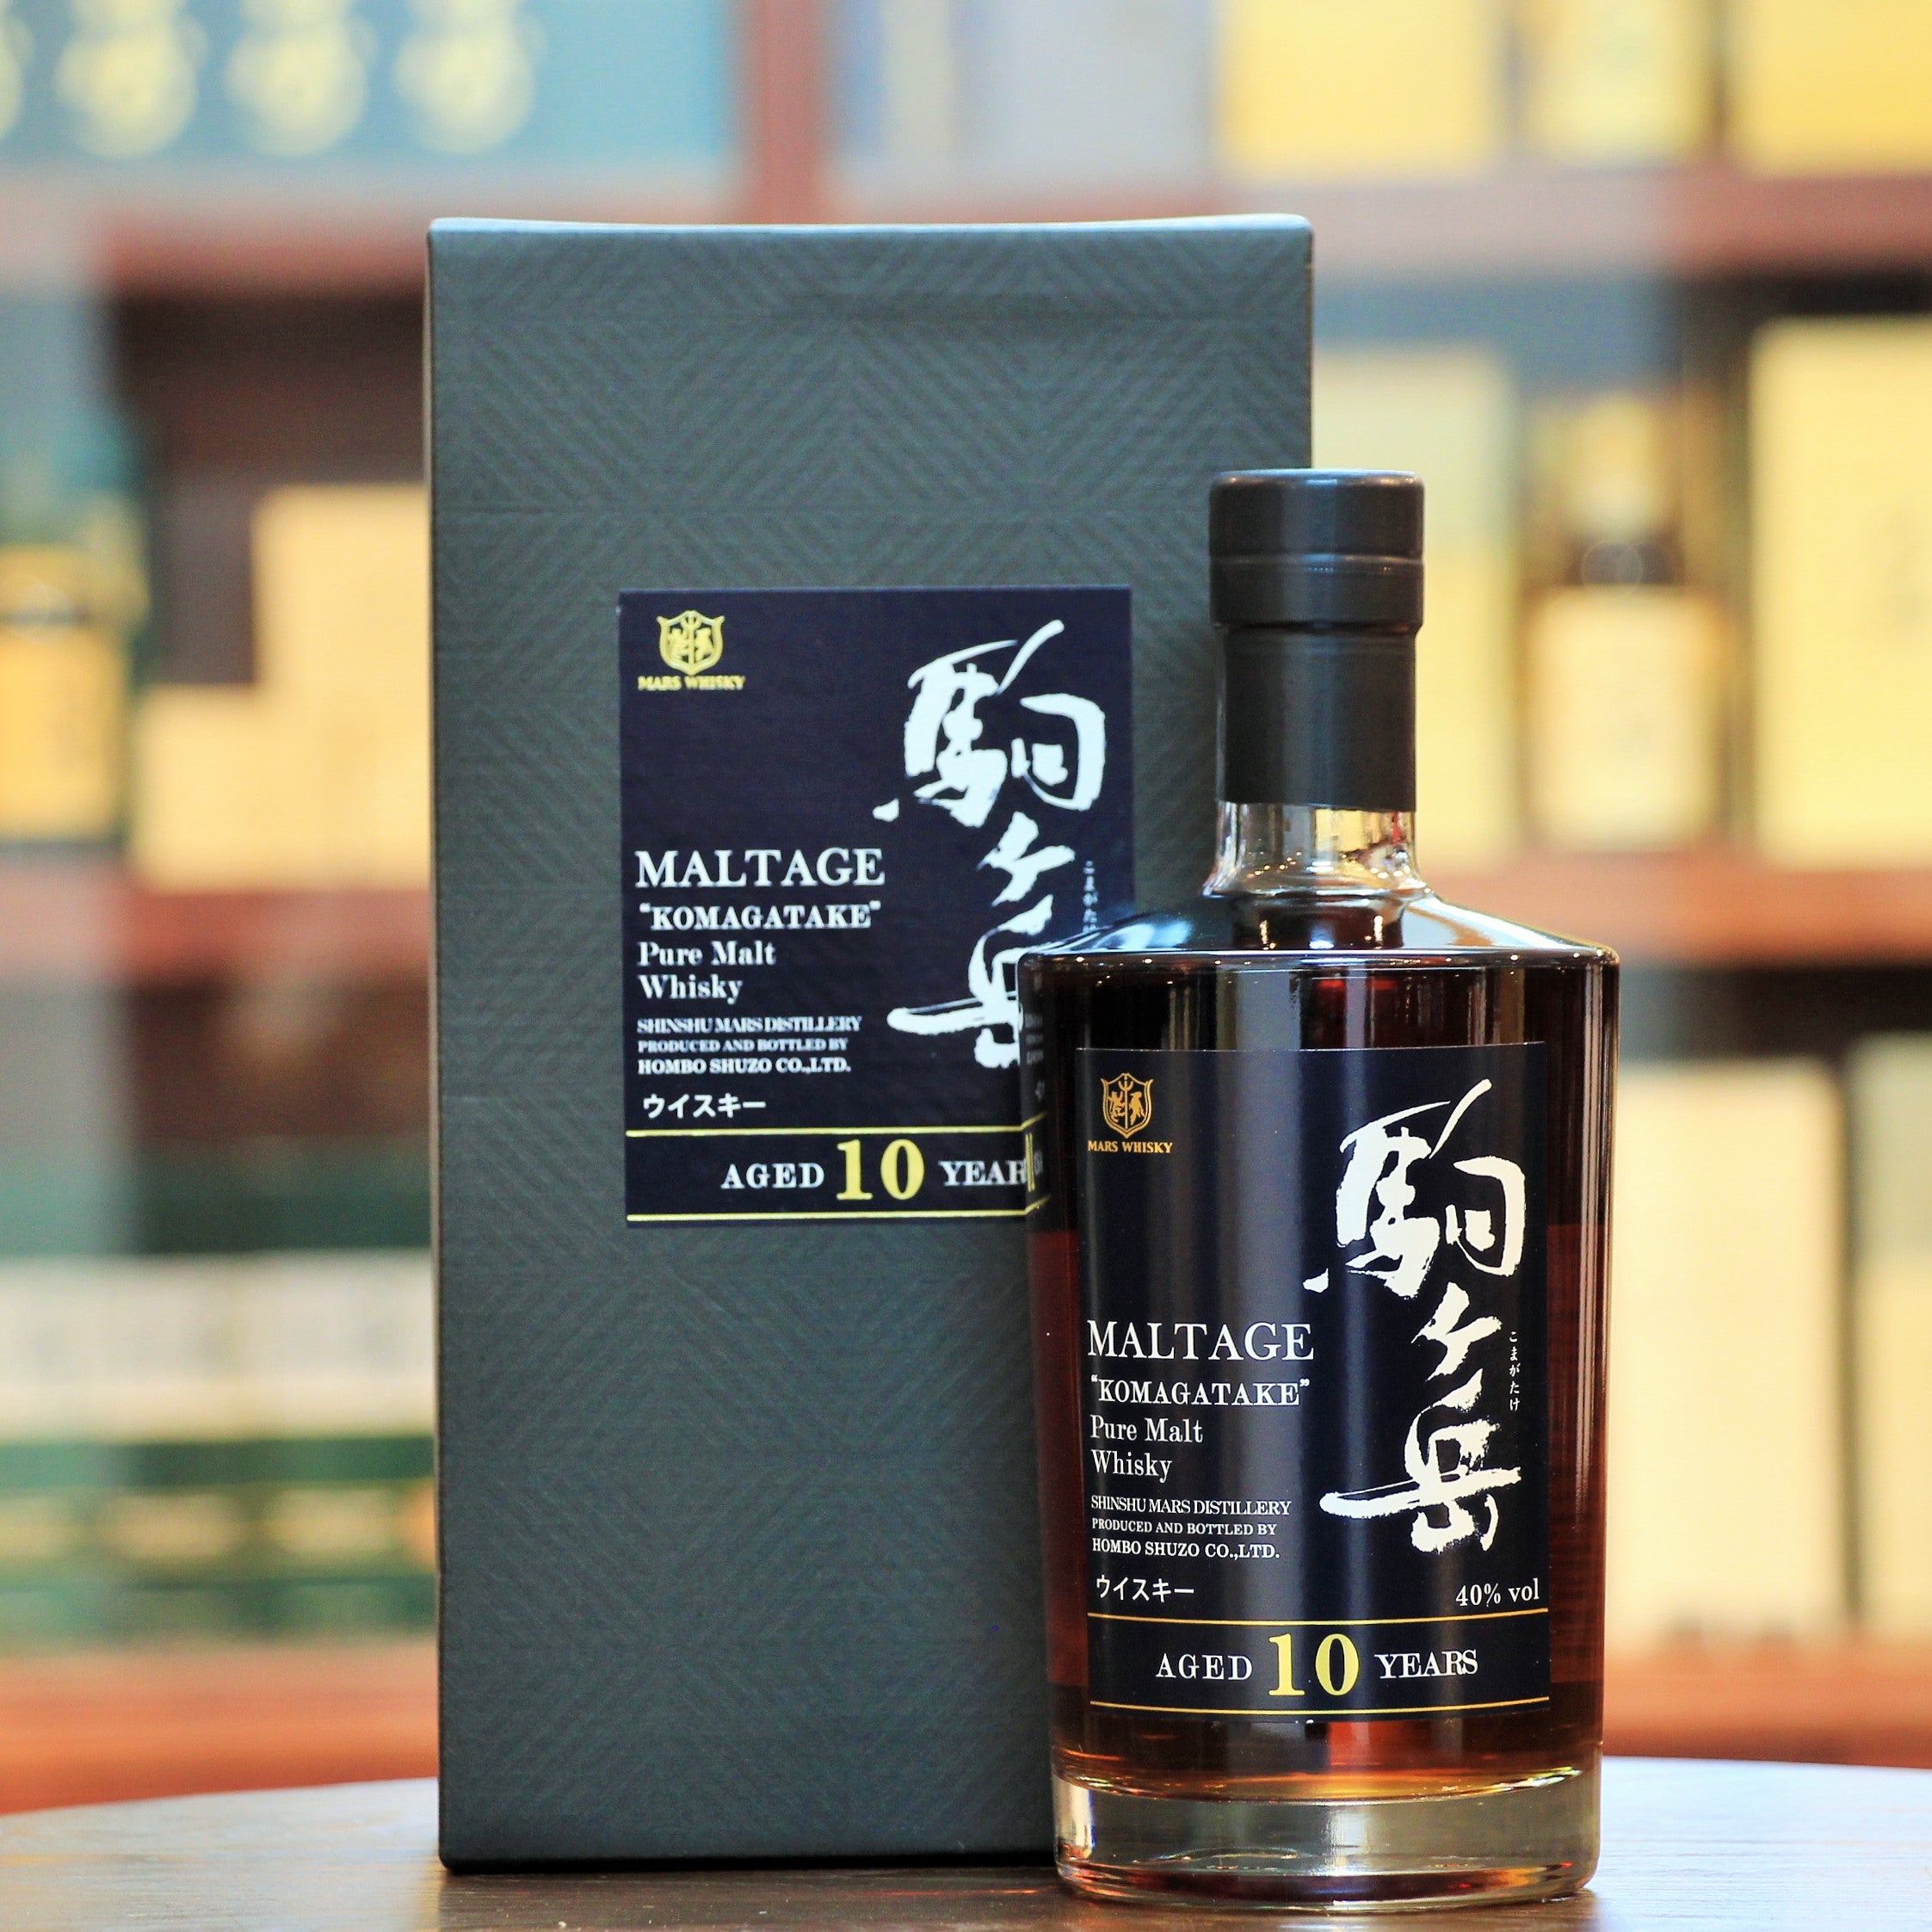 Mars Maltage 10 Years Old Komagatake Single Malt, An old bottling from Mars under the name of "MALTAGE". Distilled at the highest operational distillery in Japan, and vatting carefully selected malts, the palate is reminiscent of red fruits, like cherries with a lovely finish